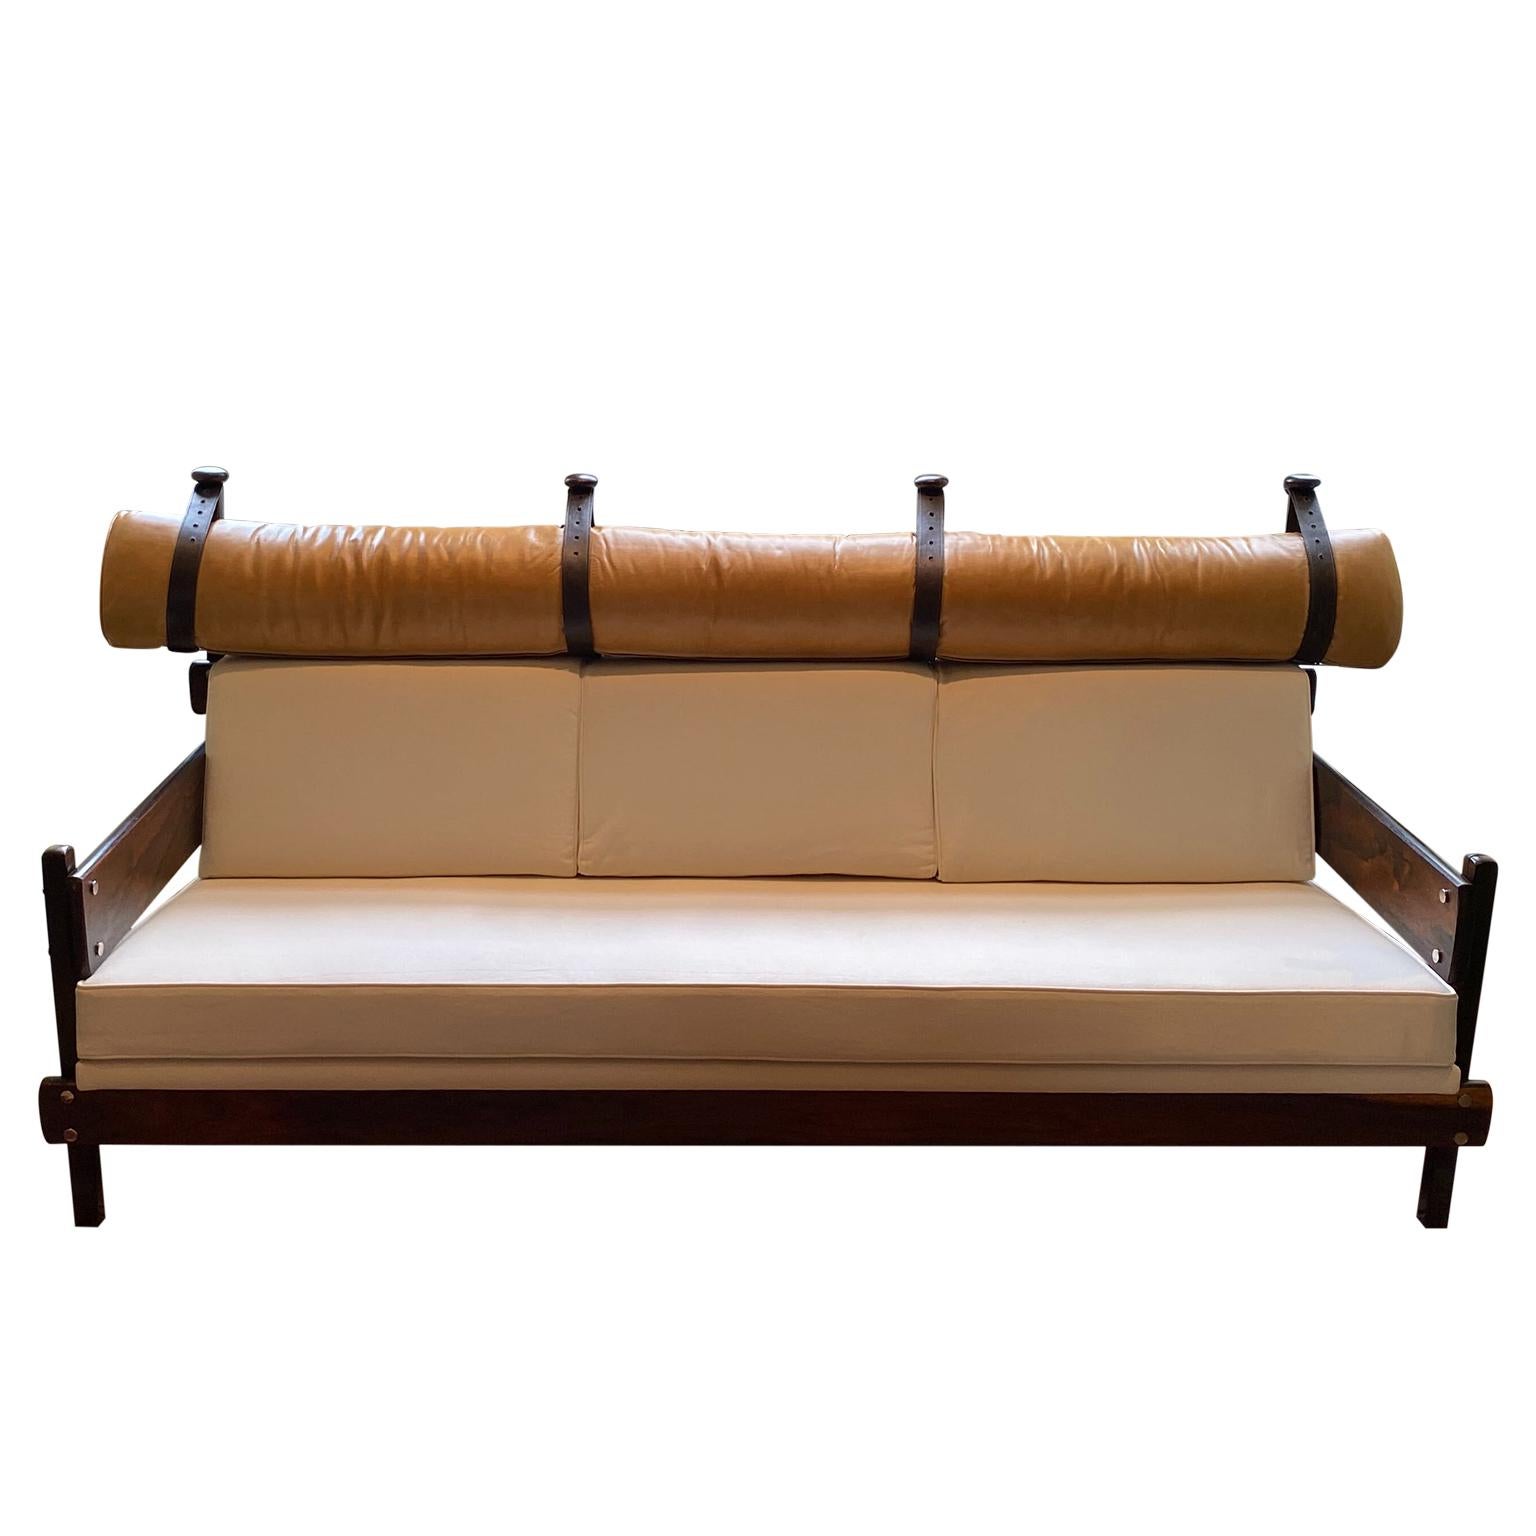 A natural derivative of the homonymous armchair, Tonico couch brings the same comfort solution with a rather large roll to support the head. In the couch, it comes attached and it has intermediate rear legs due to its length. Relaxed as the armchair